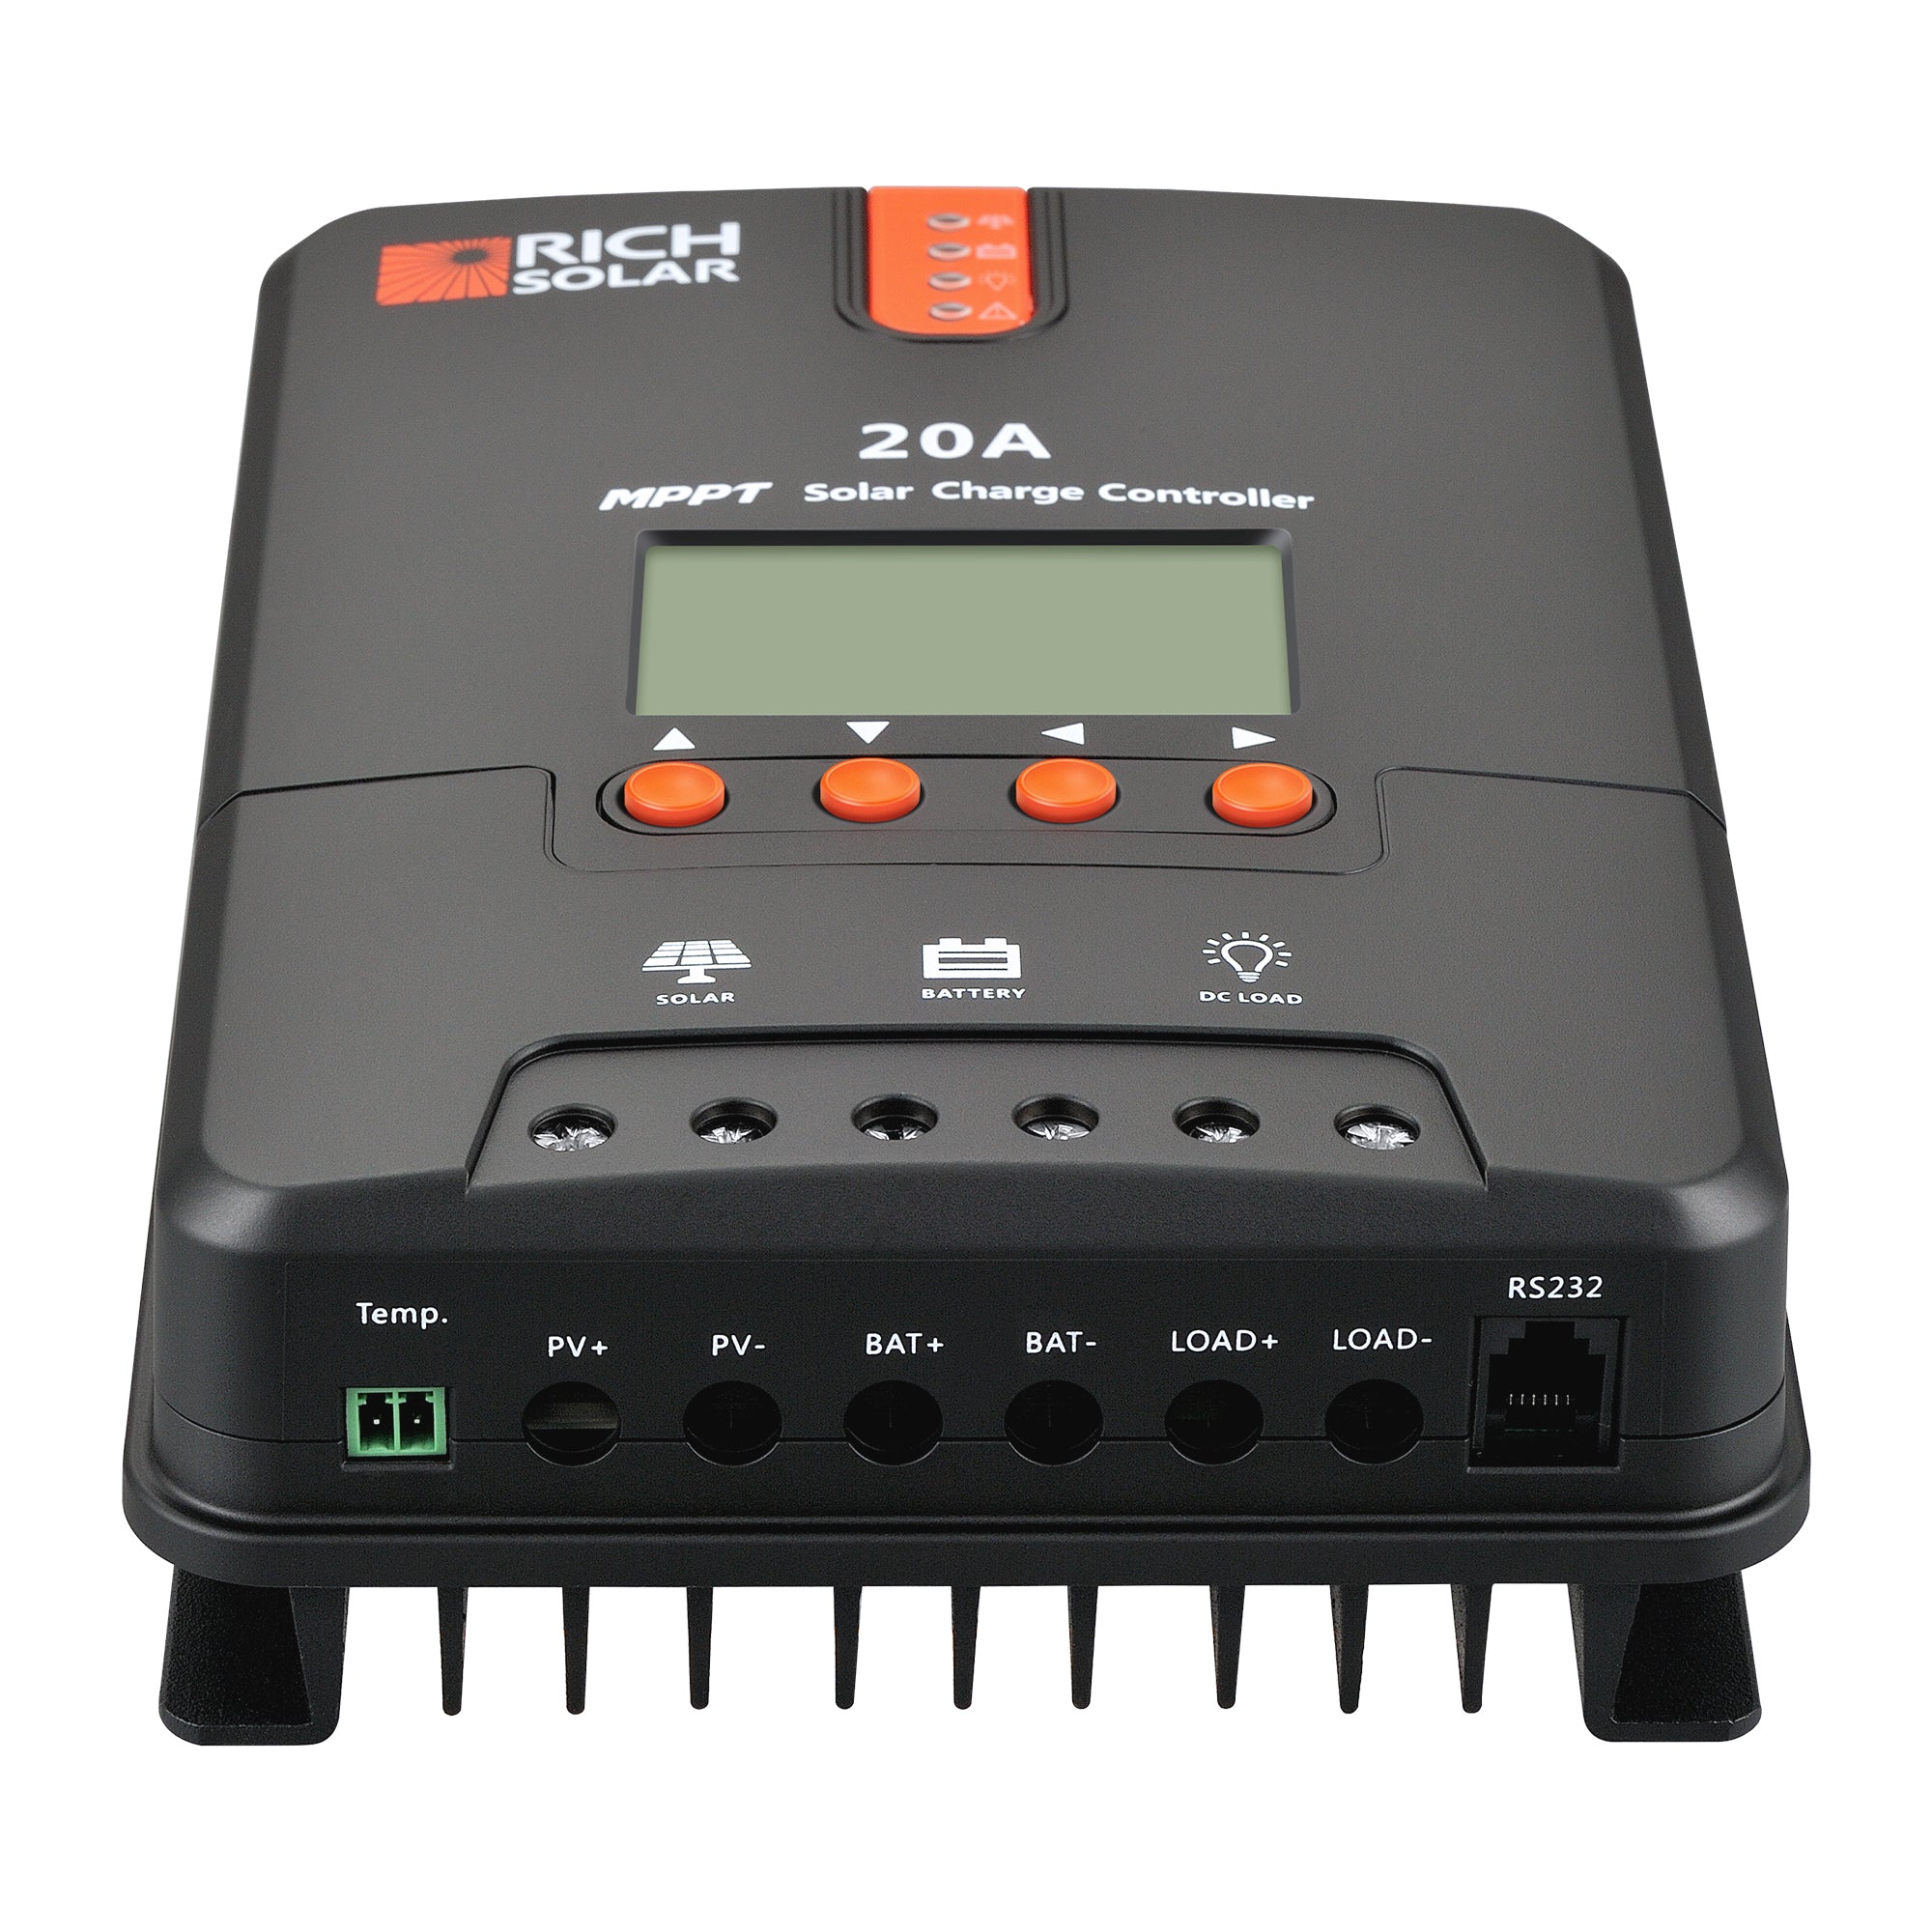 RICH SOLAR 20 Amp MPPT Solar Charge Controller - Solar Generators and Power Stations Plus